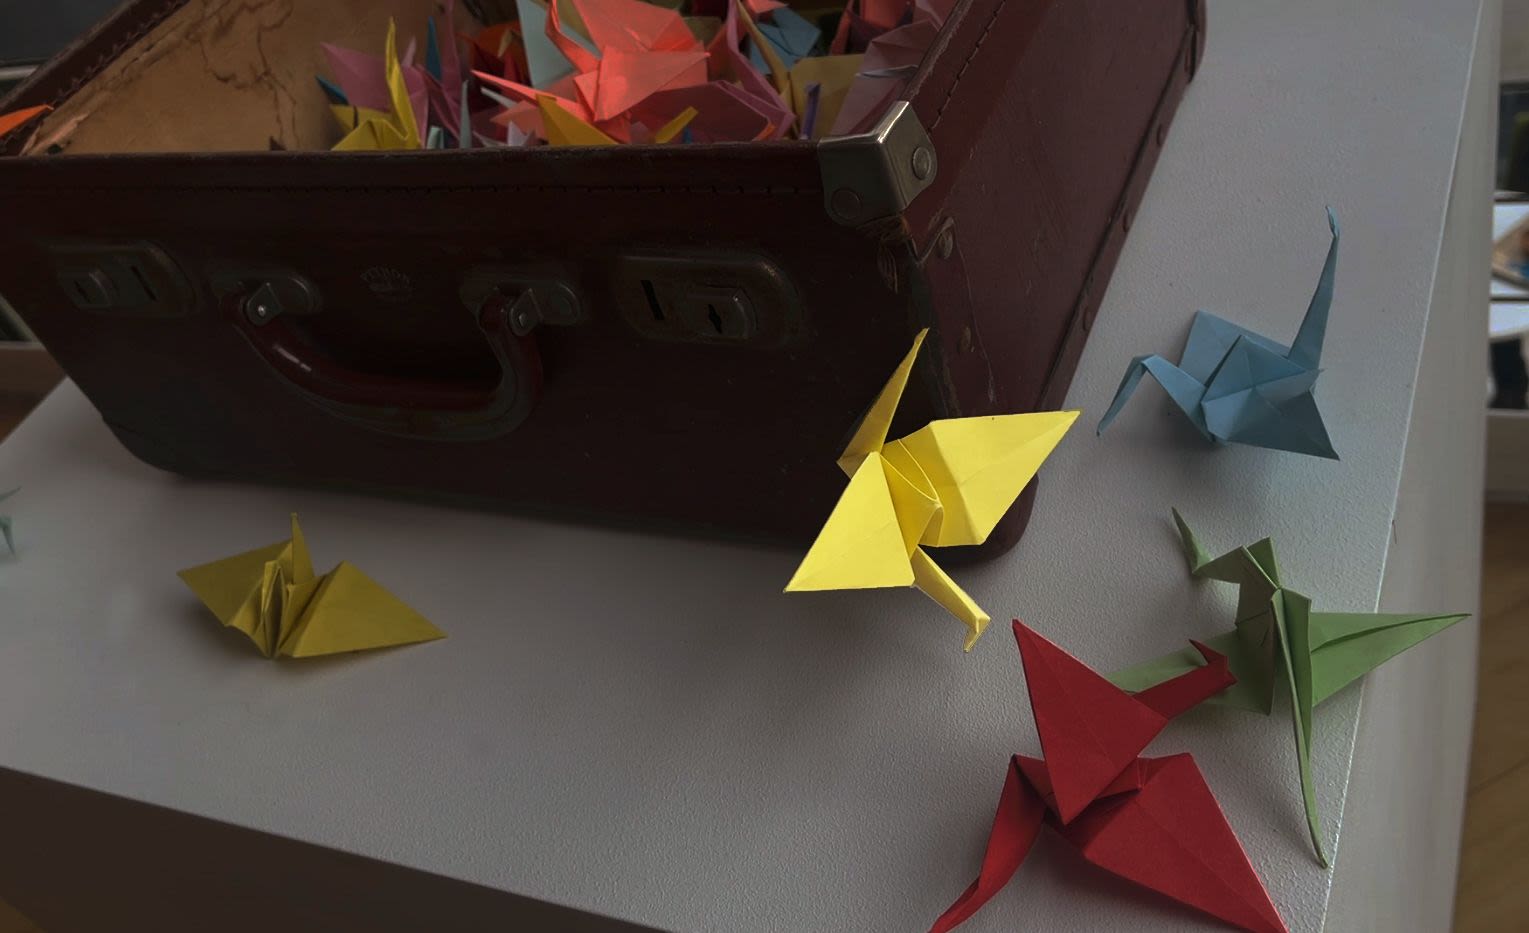 Origami birds filling and flying out from a battered suitcase